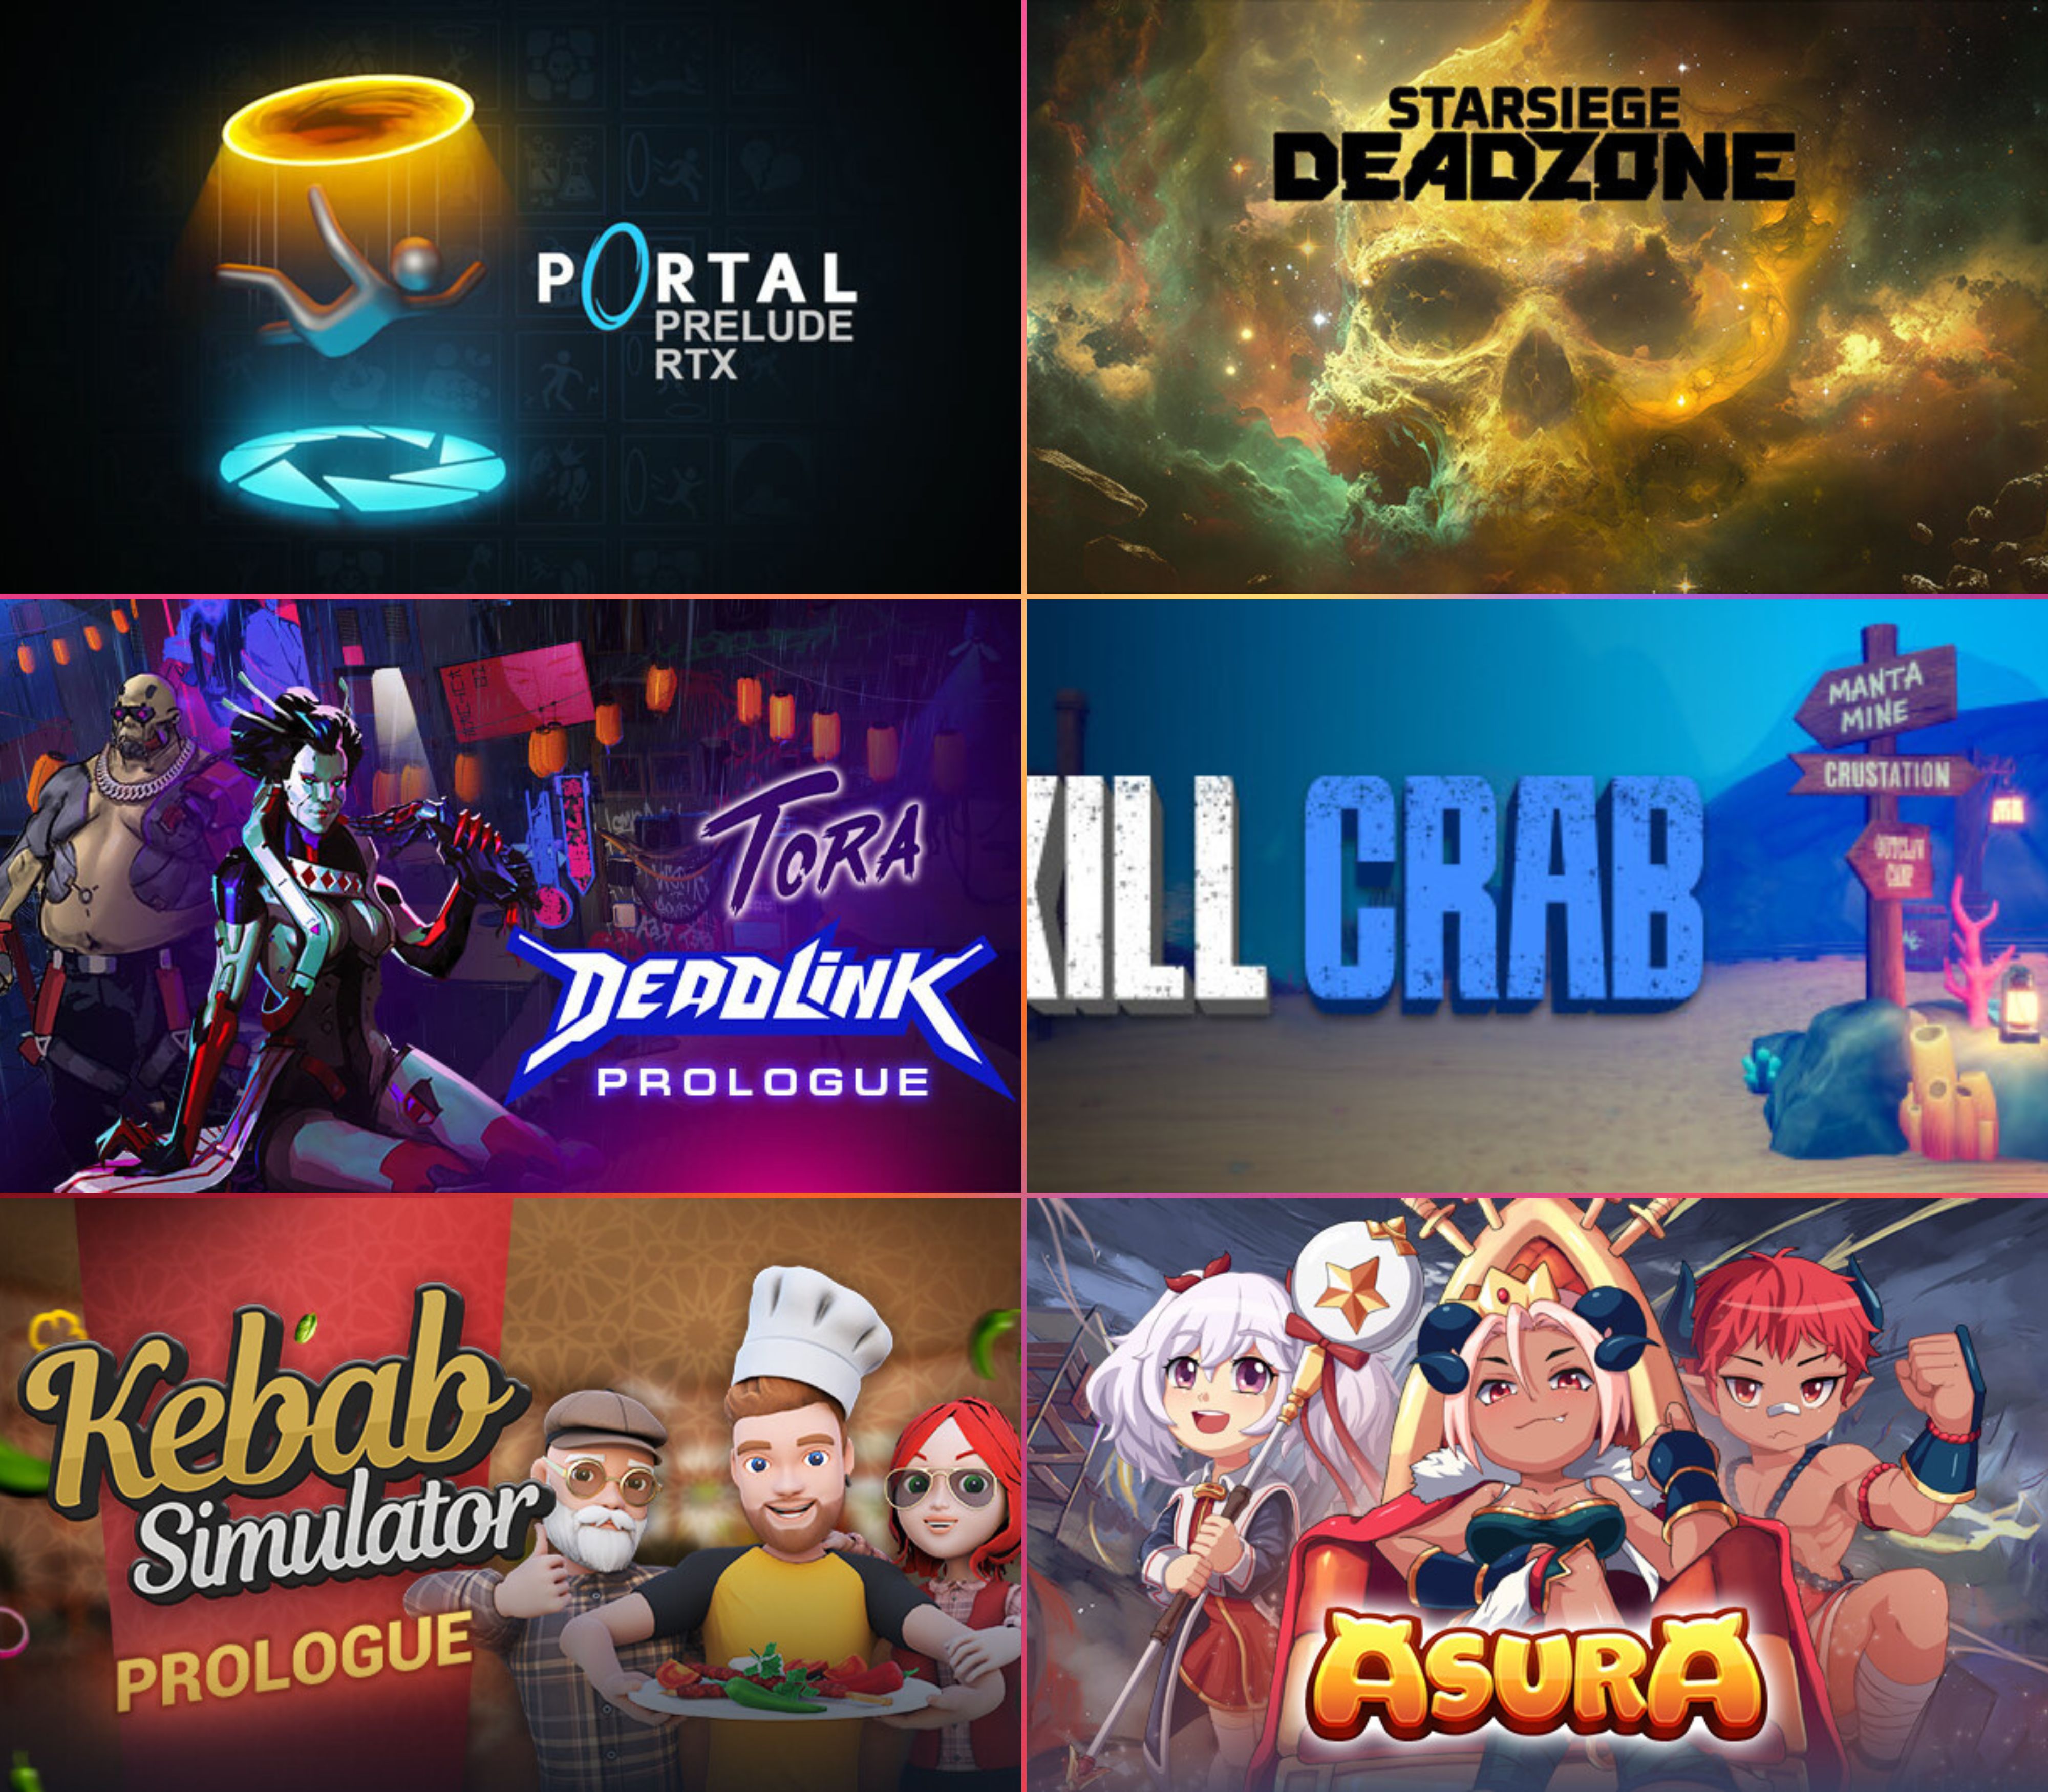 Free Steam Games✨ on X: ✖️🛼Claim now Your 27 Free Games on #Steam  🗓️October 7th!⬇️ 1⃣ 2⃣  3⃣ 4⃣  5⃣ 6⃣